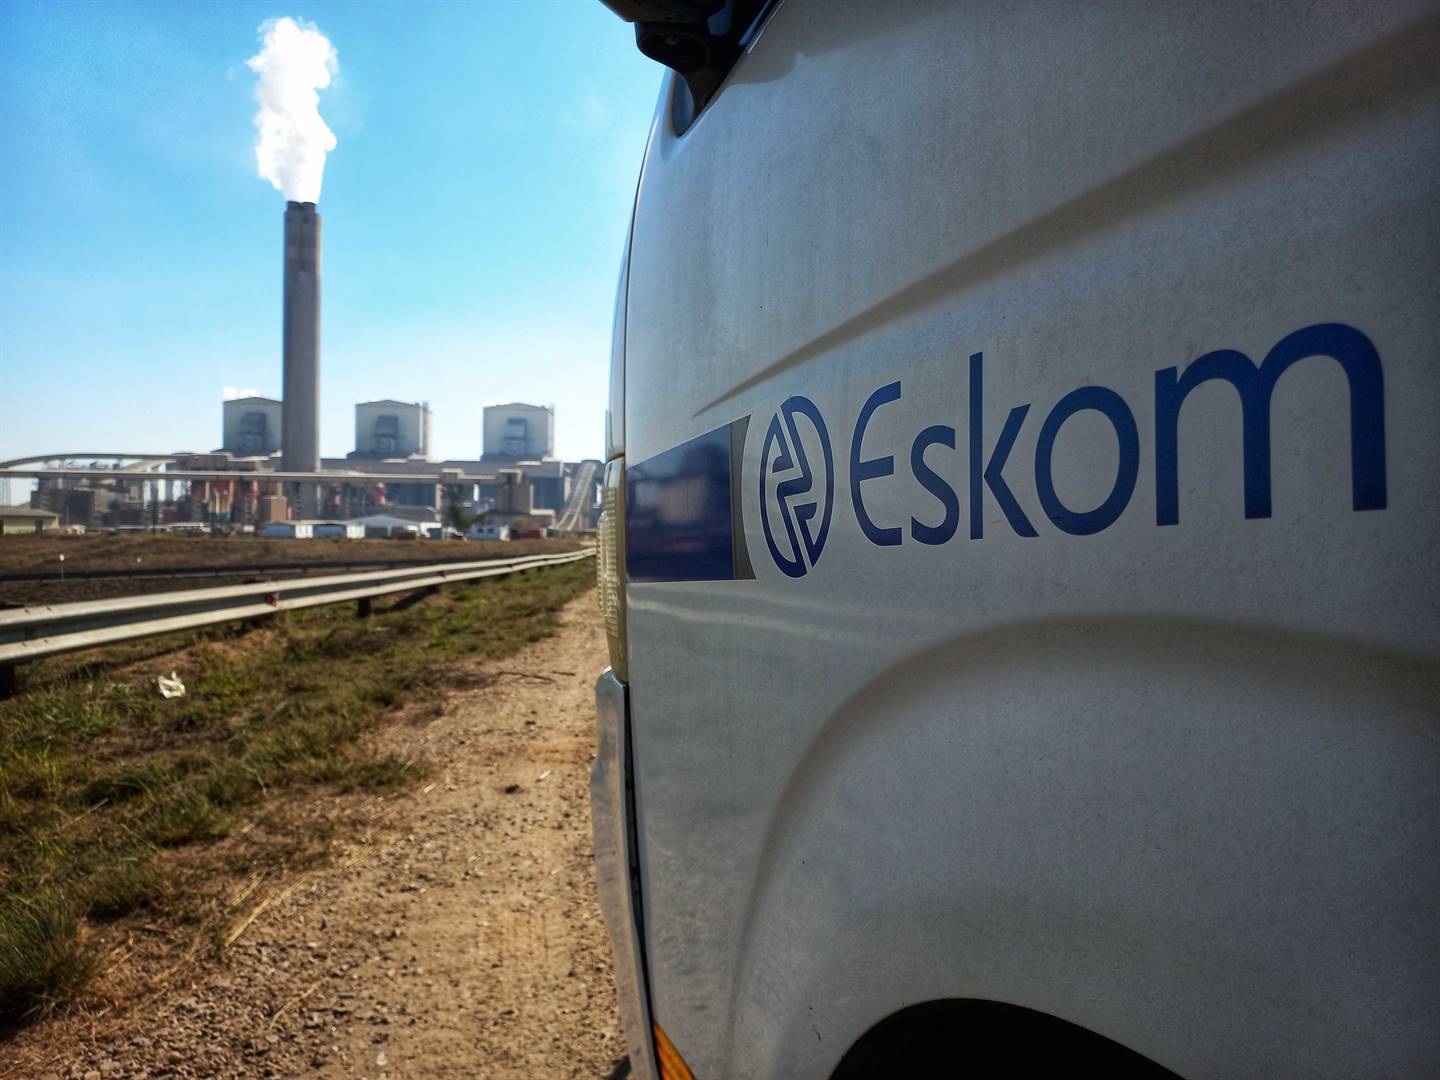 If Eskom does not get more money, it can only buy diesel again in April to supplement the poor performance of its coal-fired power stations.